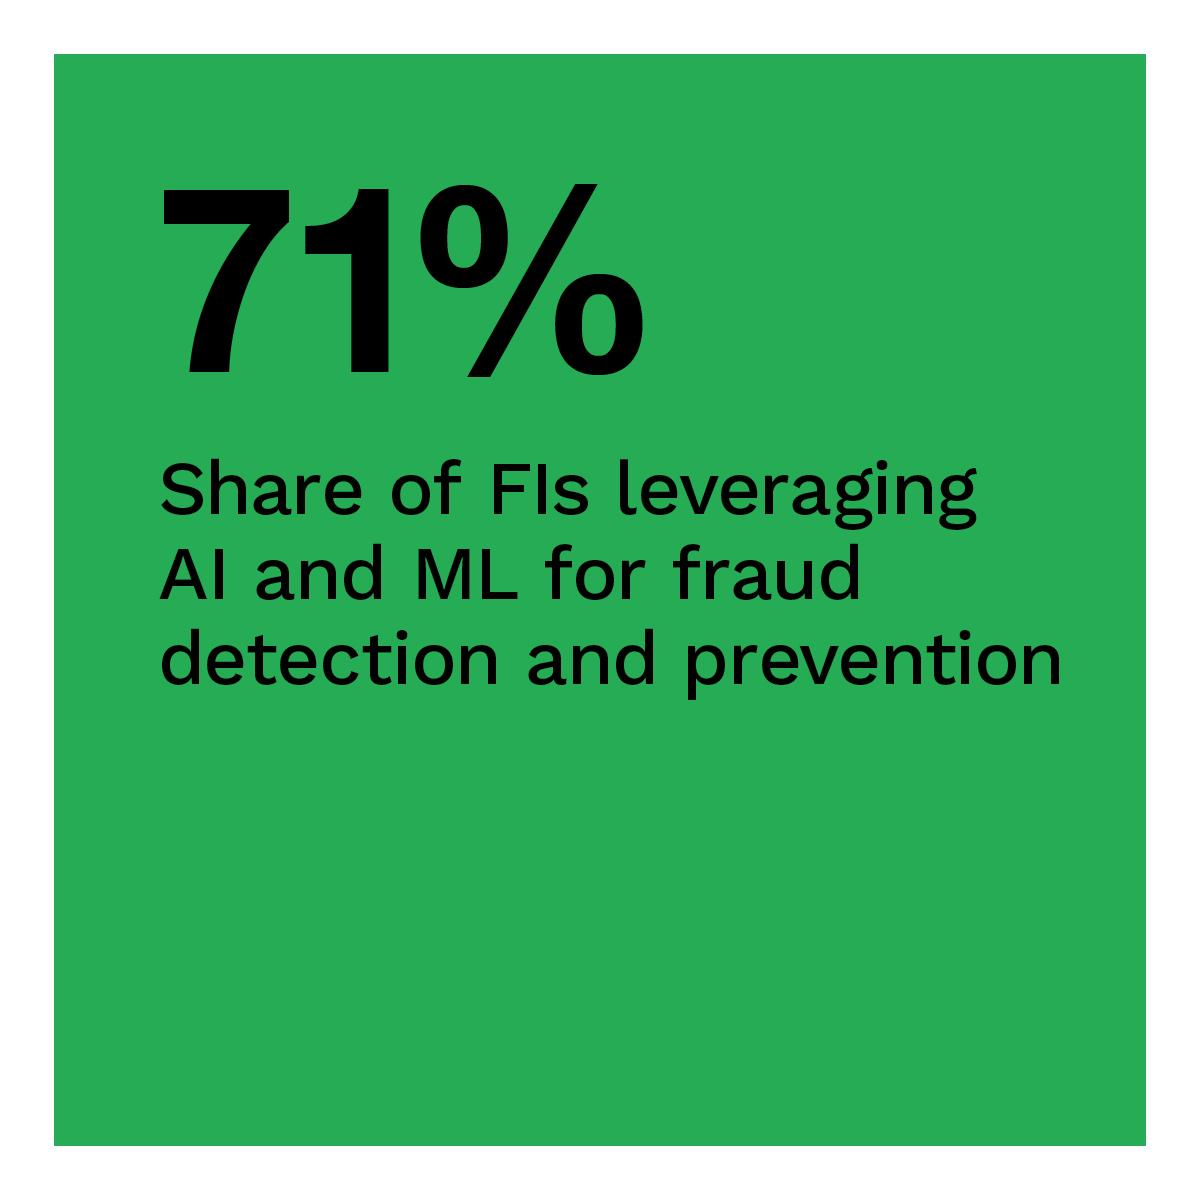  Share of FIs leveraging AI and ML for fraud detection and prevention